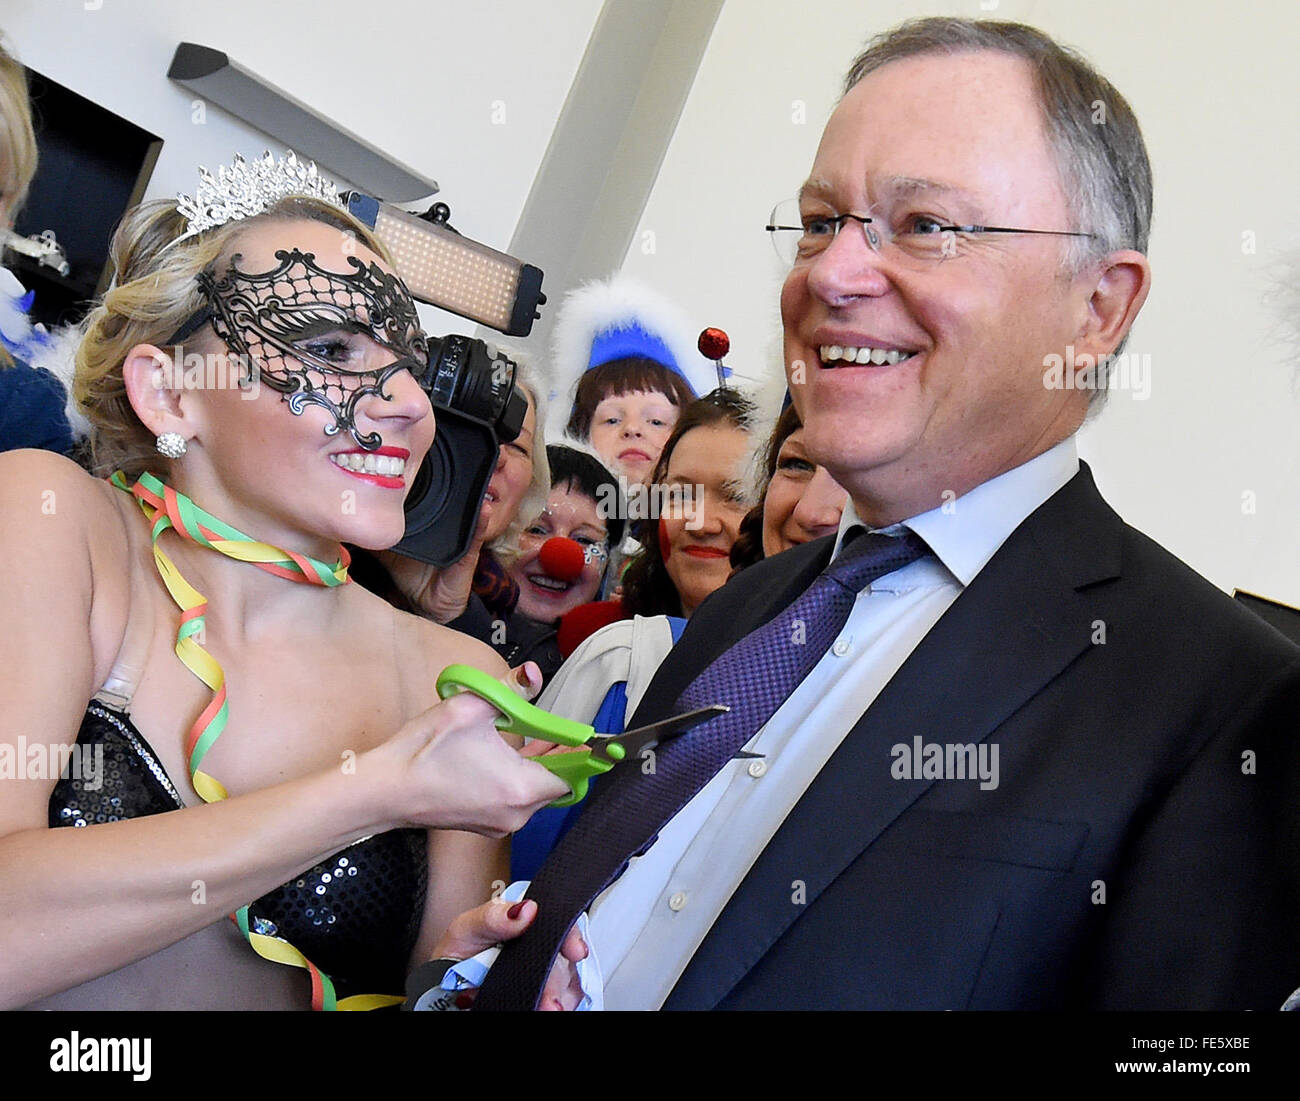 Hanover, Germany. 04th Feb, 2016. Carnival reveller Susan from Linden, Germany (L), cuts off the tie of Stephan Weil (R), premier of the German state Lower Saxony, in his office at the State Chancellery in Hanover, Germany, 04 February 2016. Photo: HOLGER HOLLEMANN/dpa/Alamy Live News Stock Photo